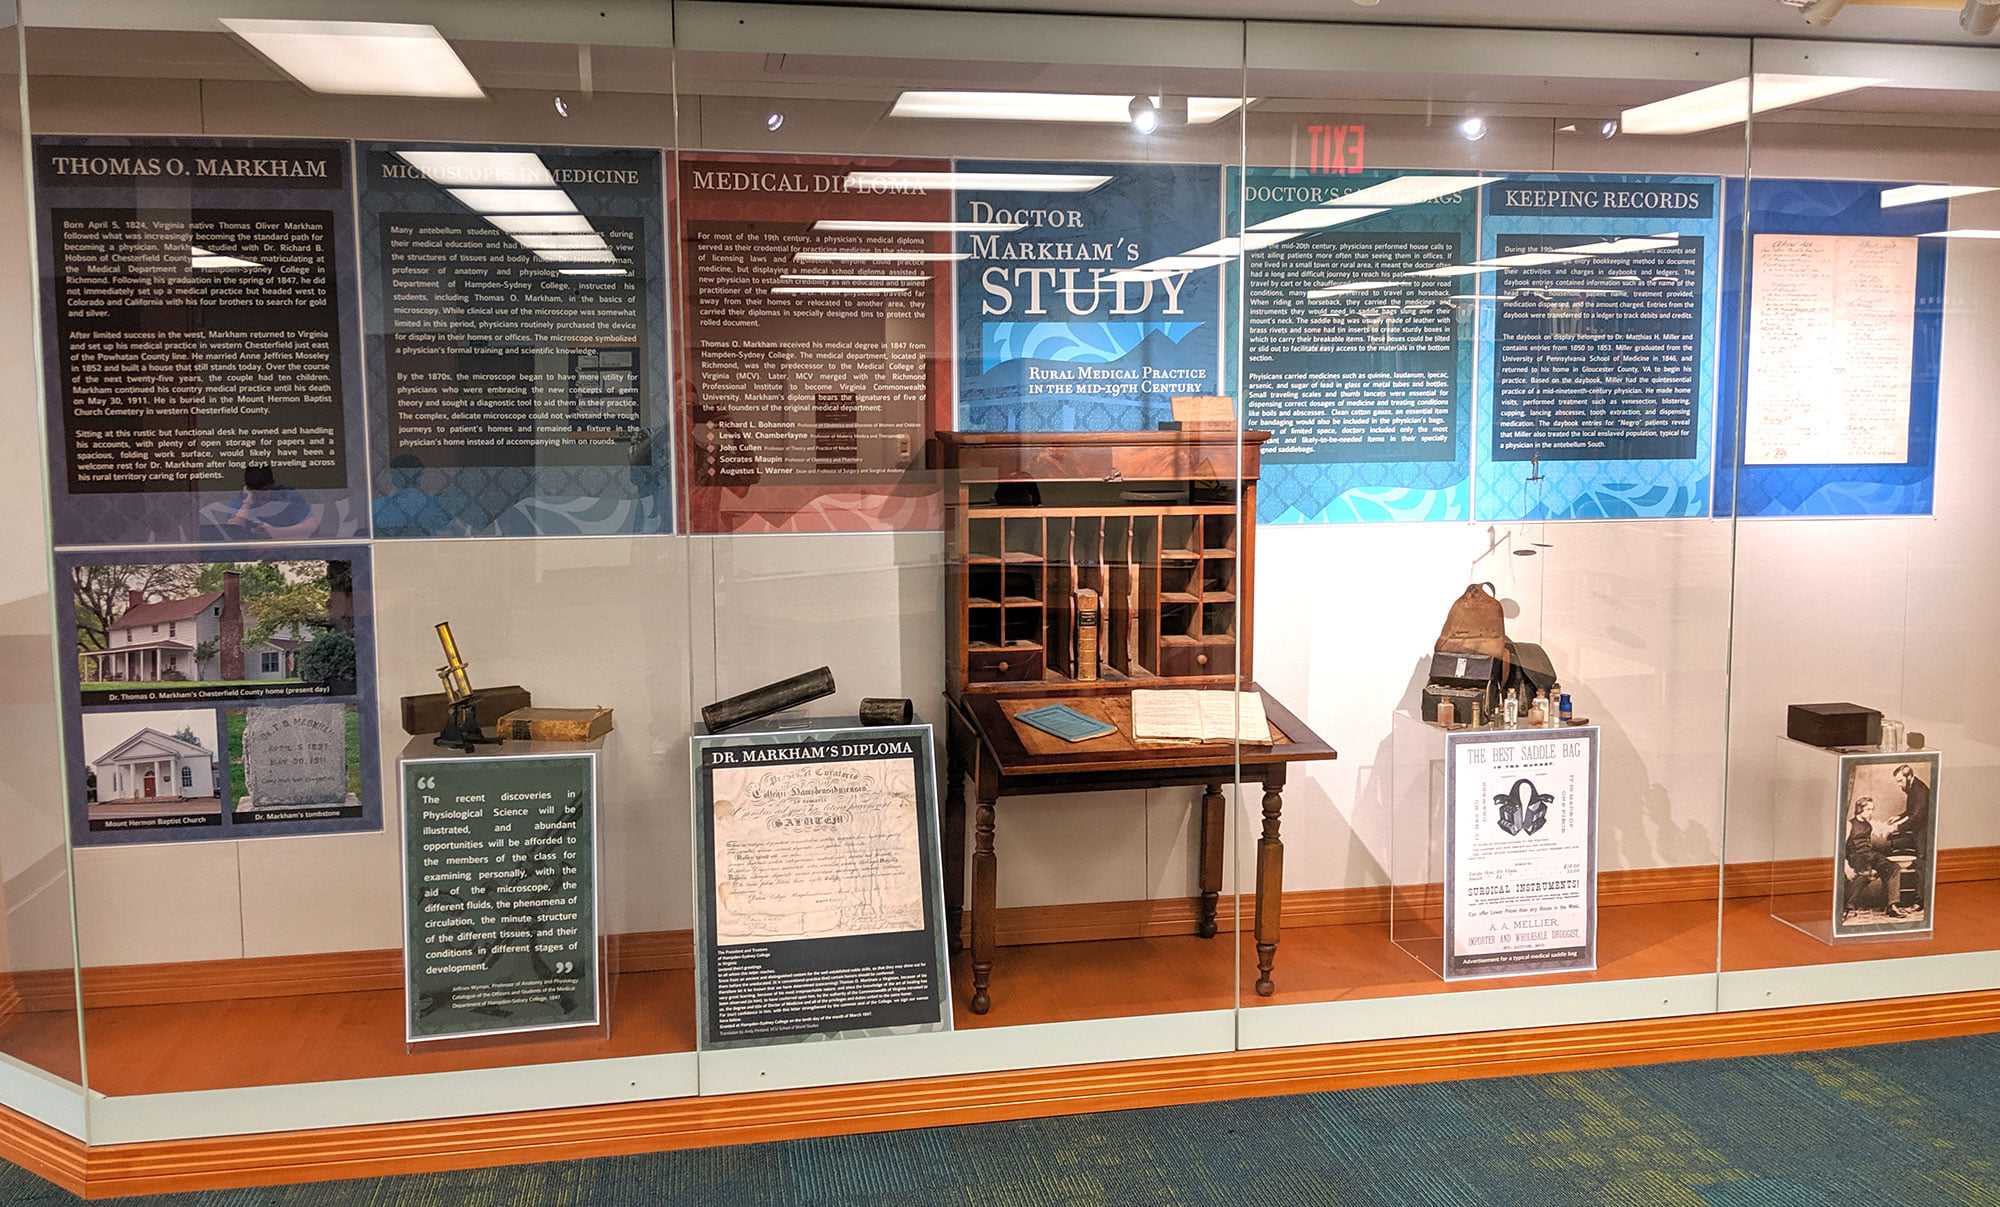 Photograph of exhibit featuring information panels and artifacts related to Dr. Markham, including his person desk